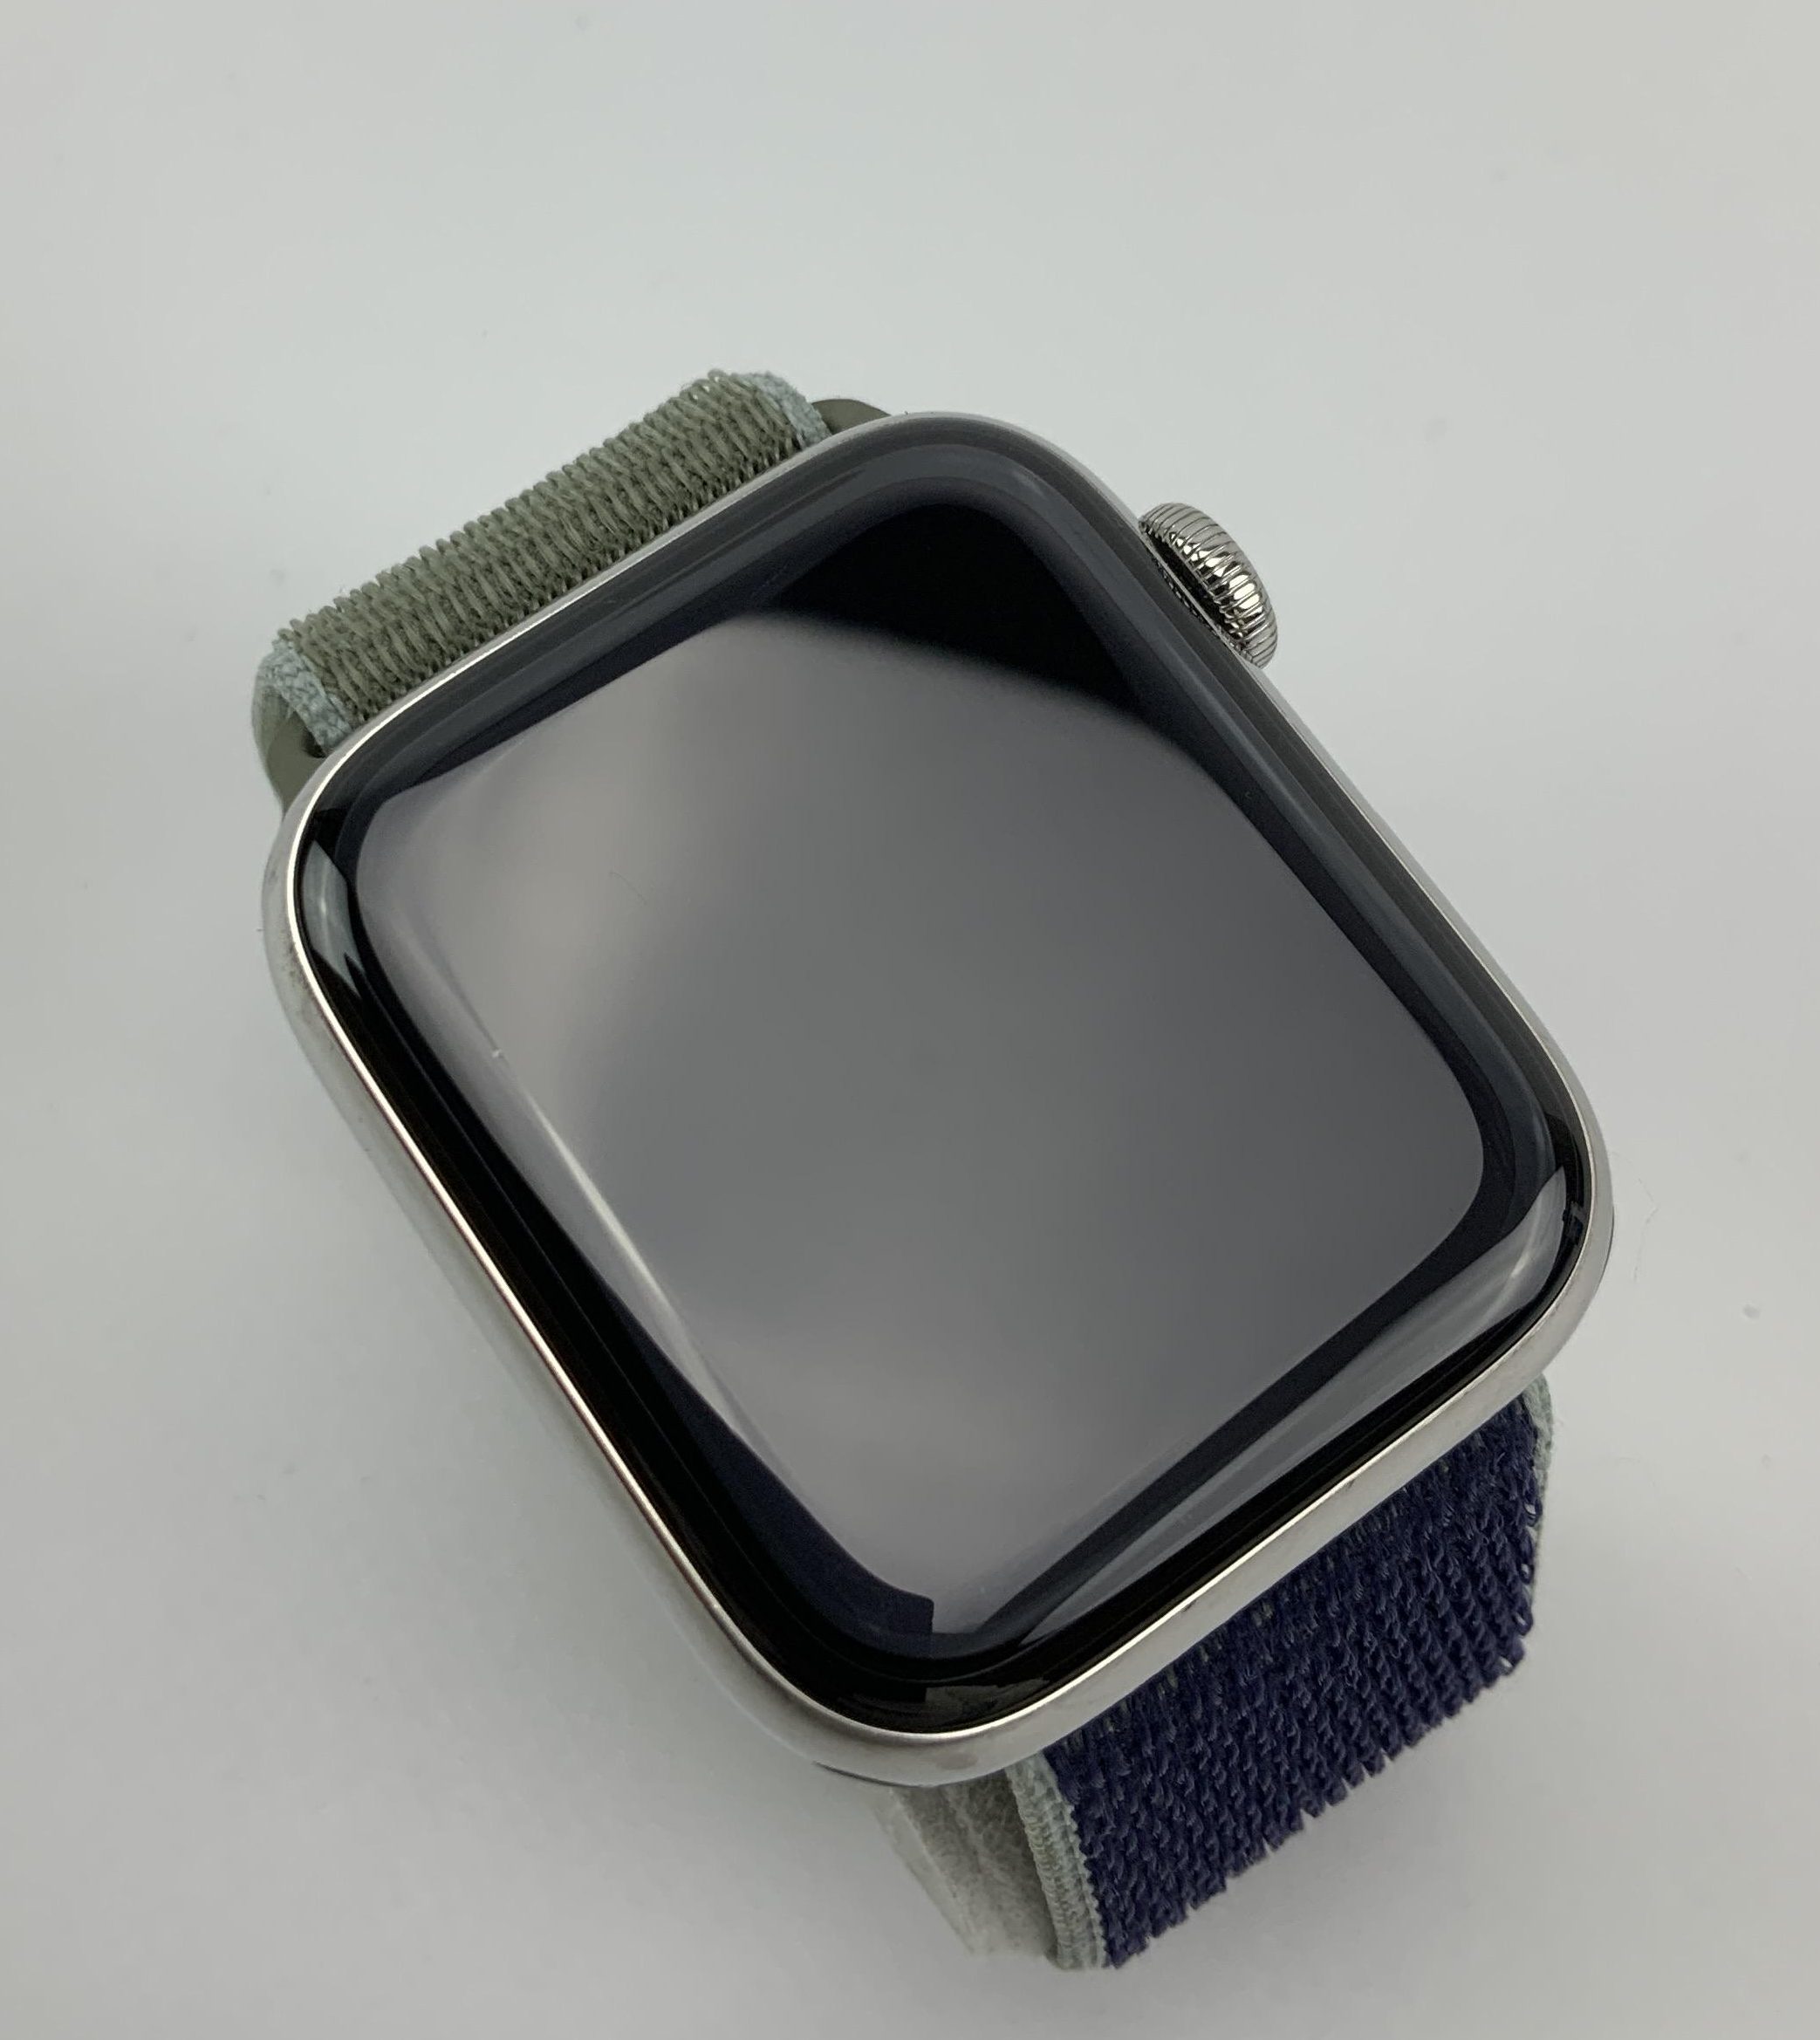 Watch Series 5 Steel Cellular (44mm), Silver, image 2